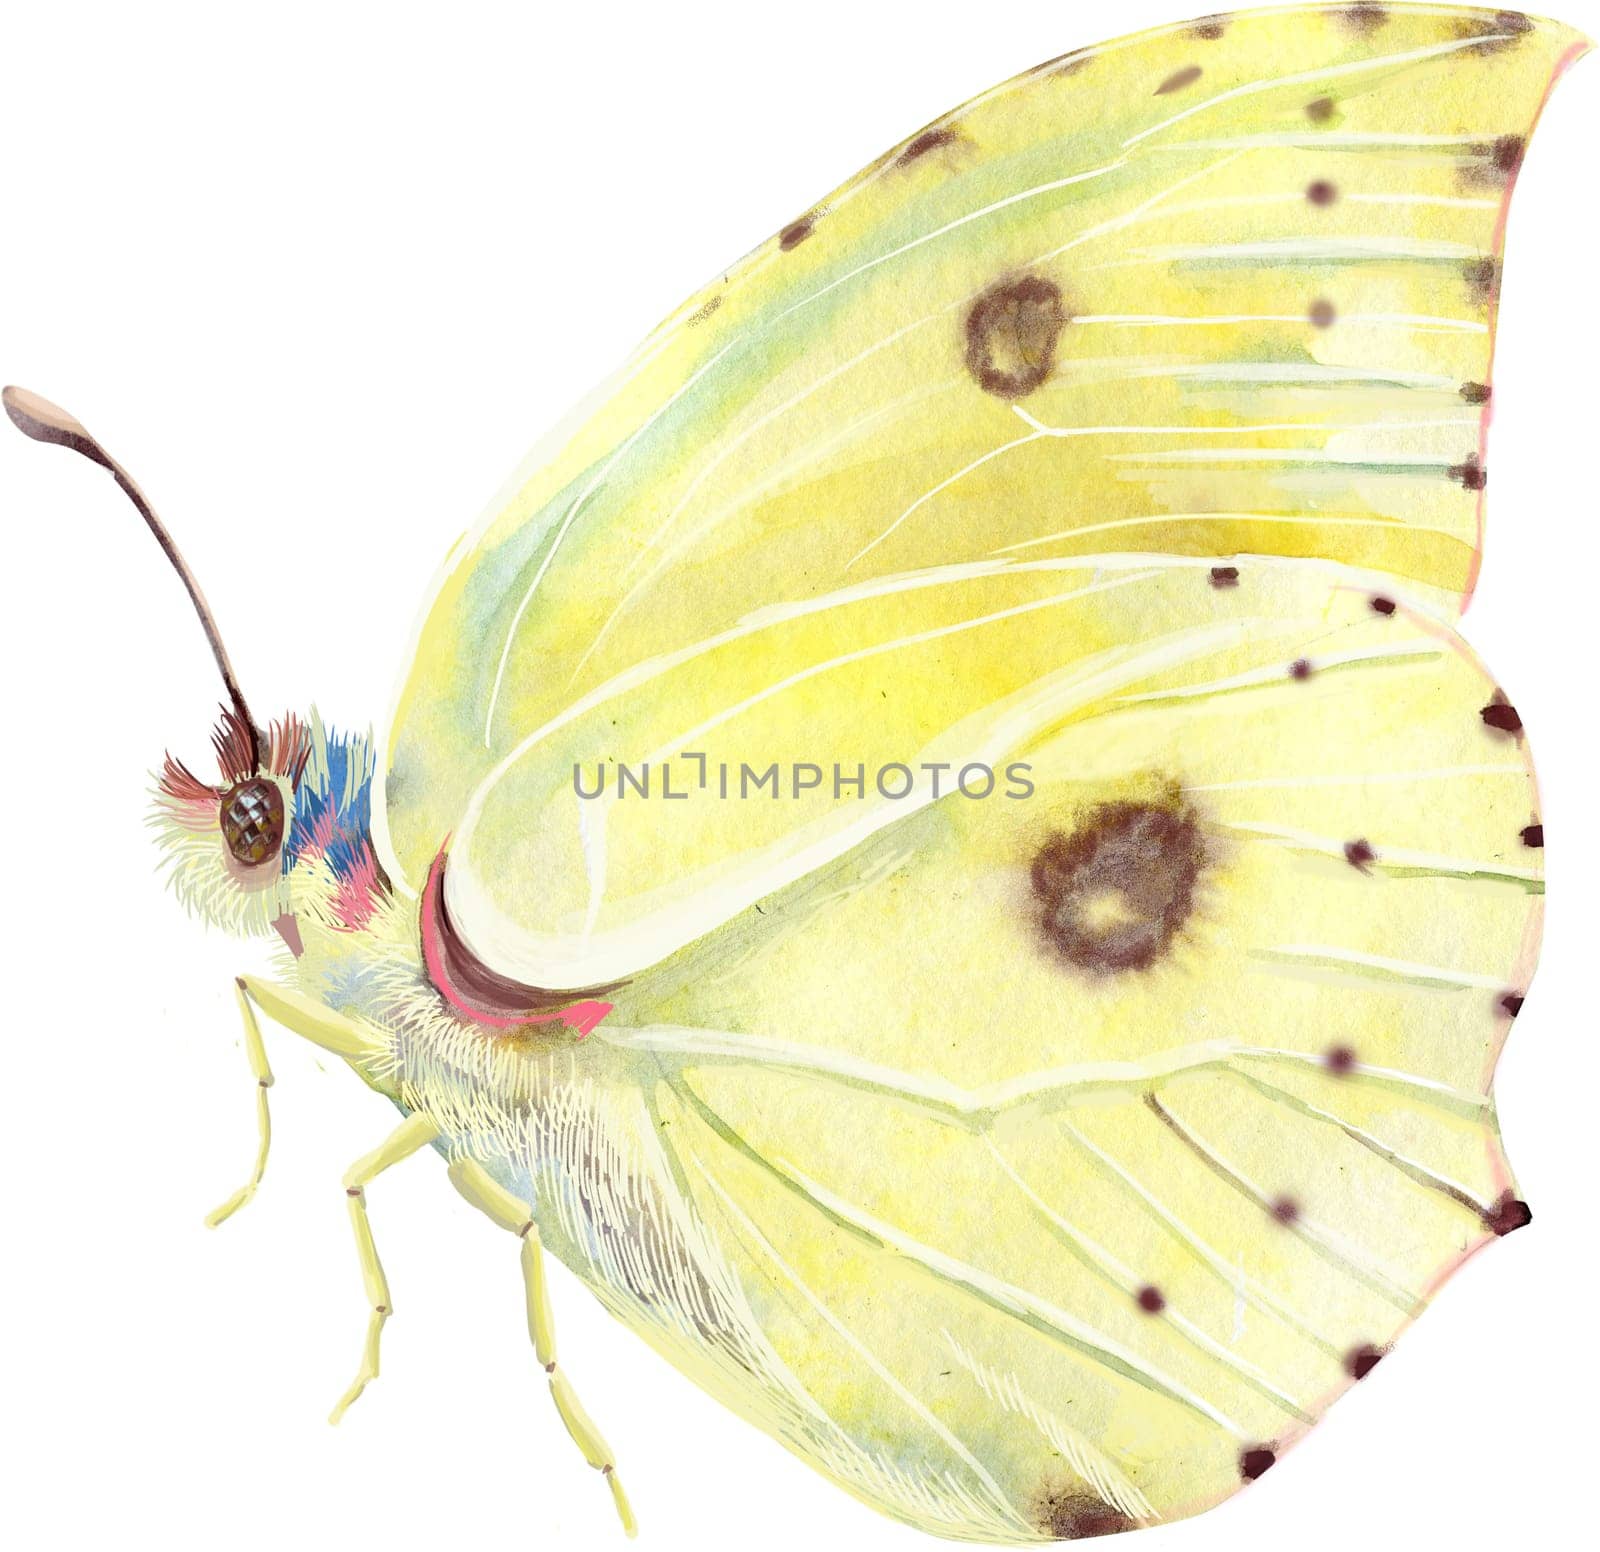 The yellow Lemongrass butterfly with folded wings. Side view. Watercolor illustration